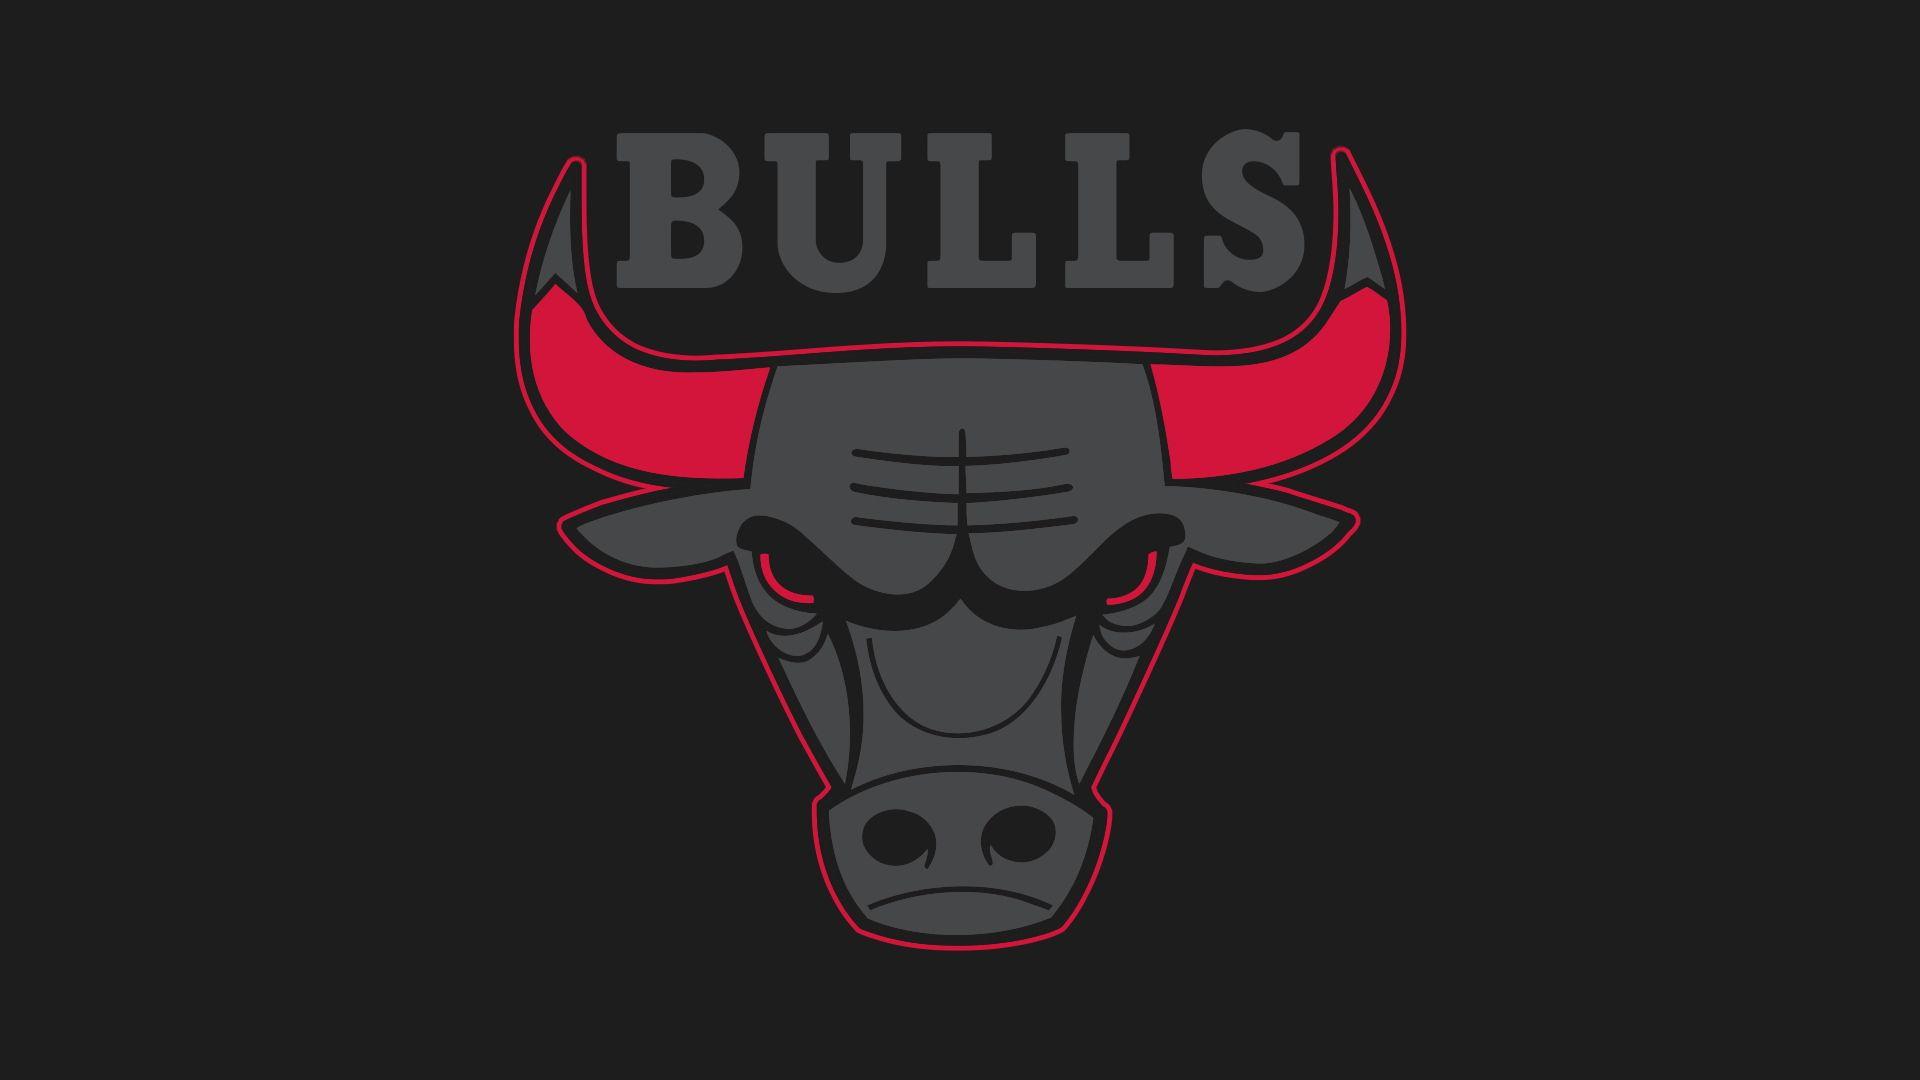 Chicago Bulls Wallpapers Free - Wallpaper Cave